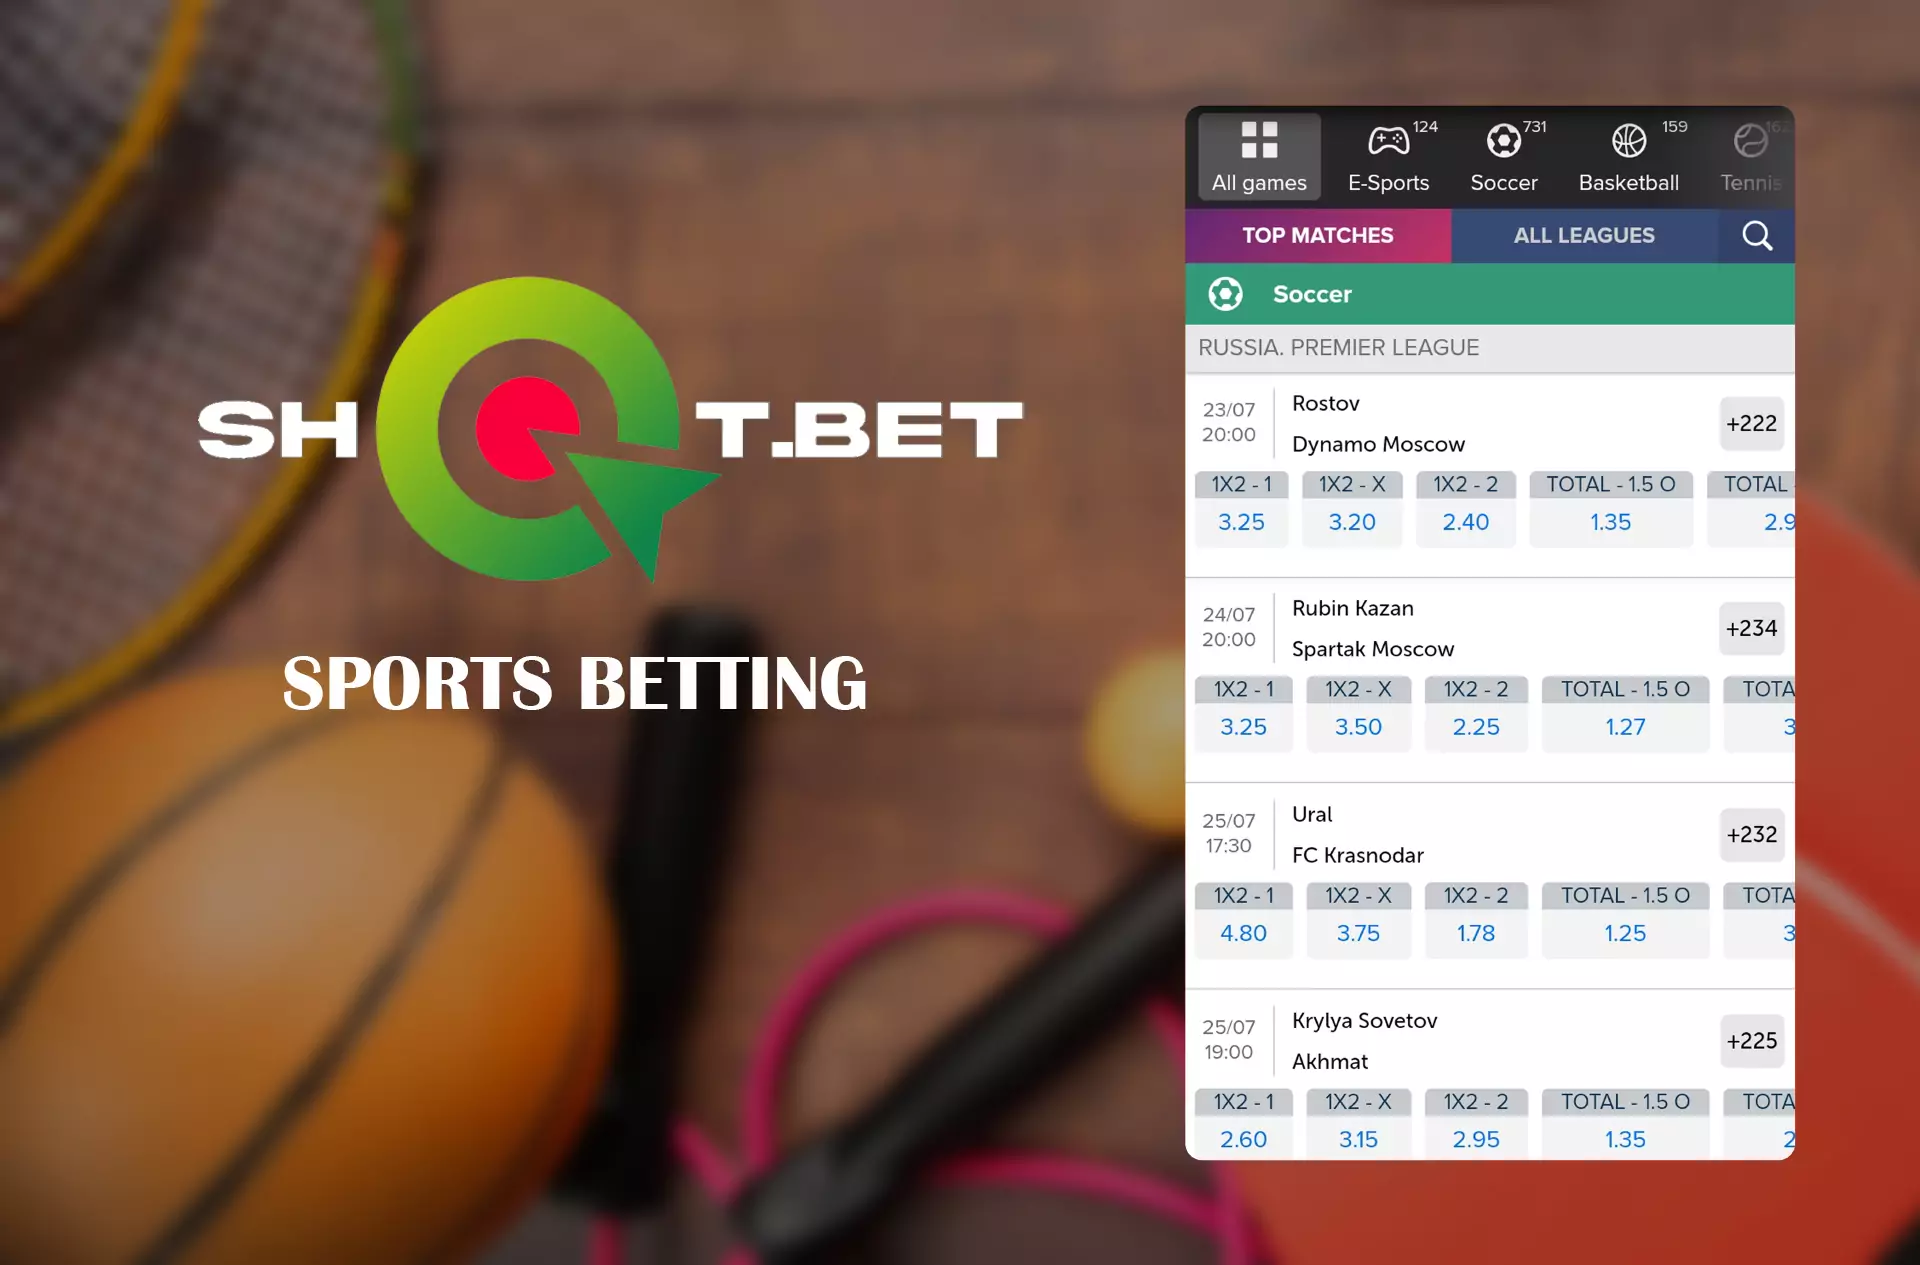 How to Bet in Shot Bet